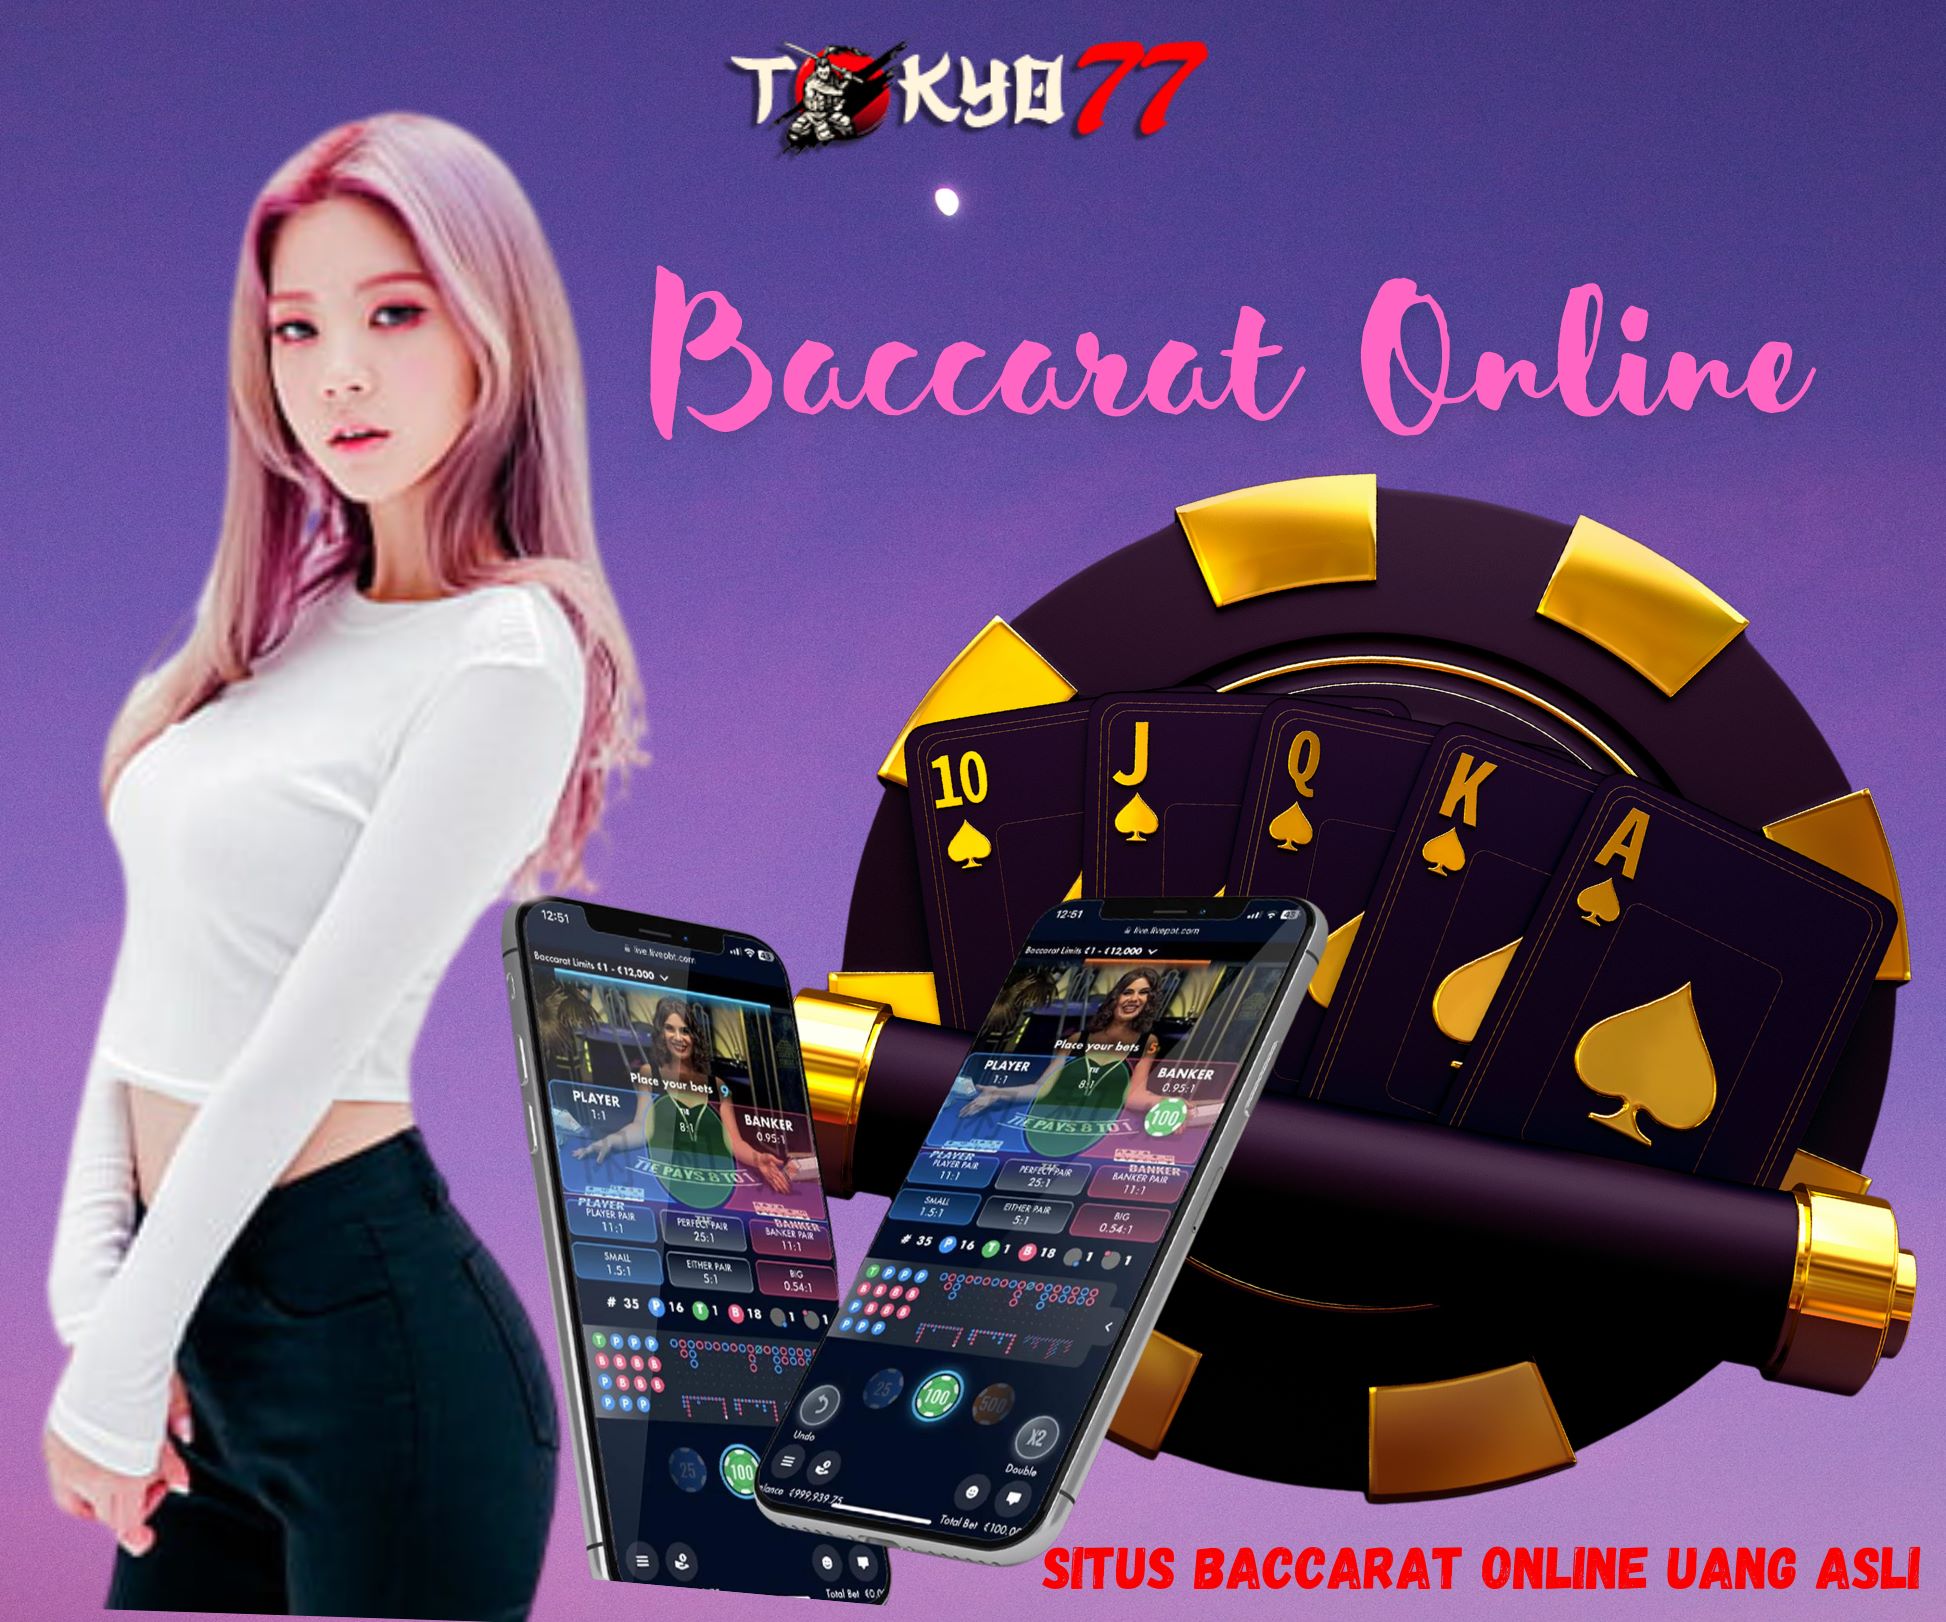 Proving the fun that can be had at Live Casino Baccarat